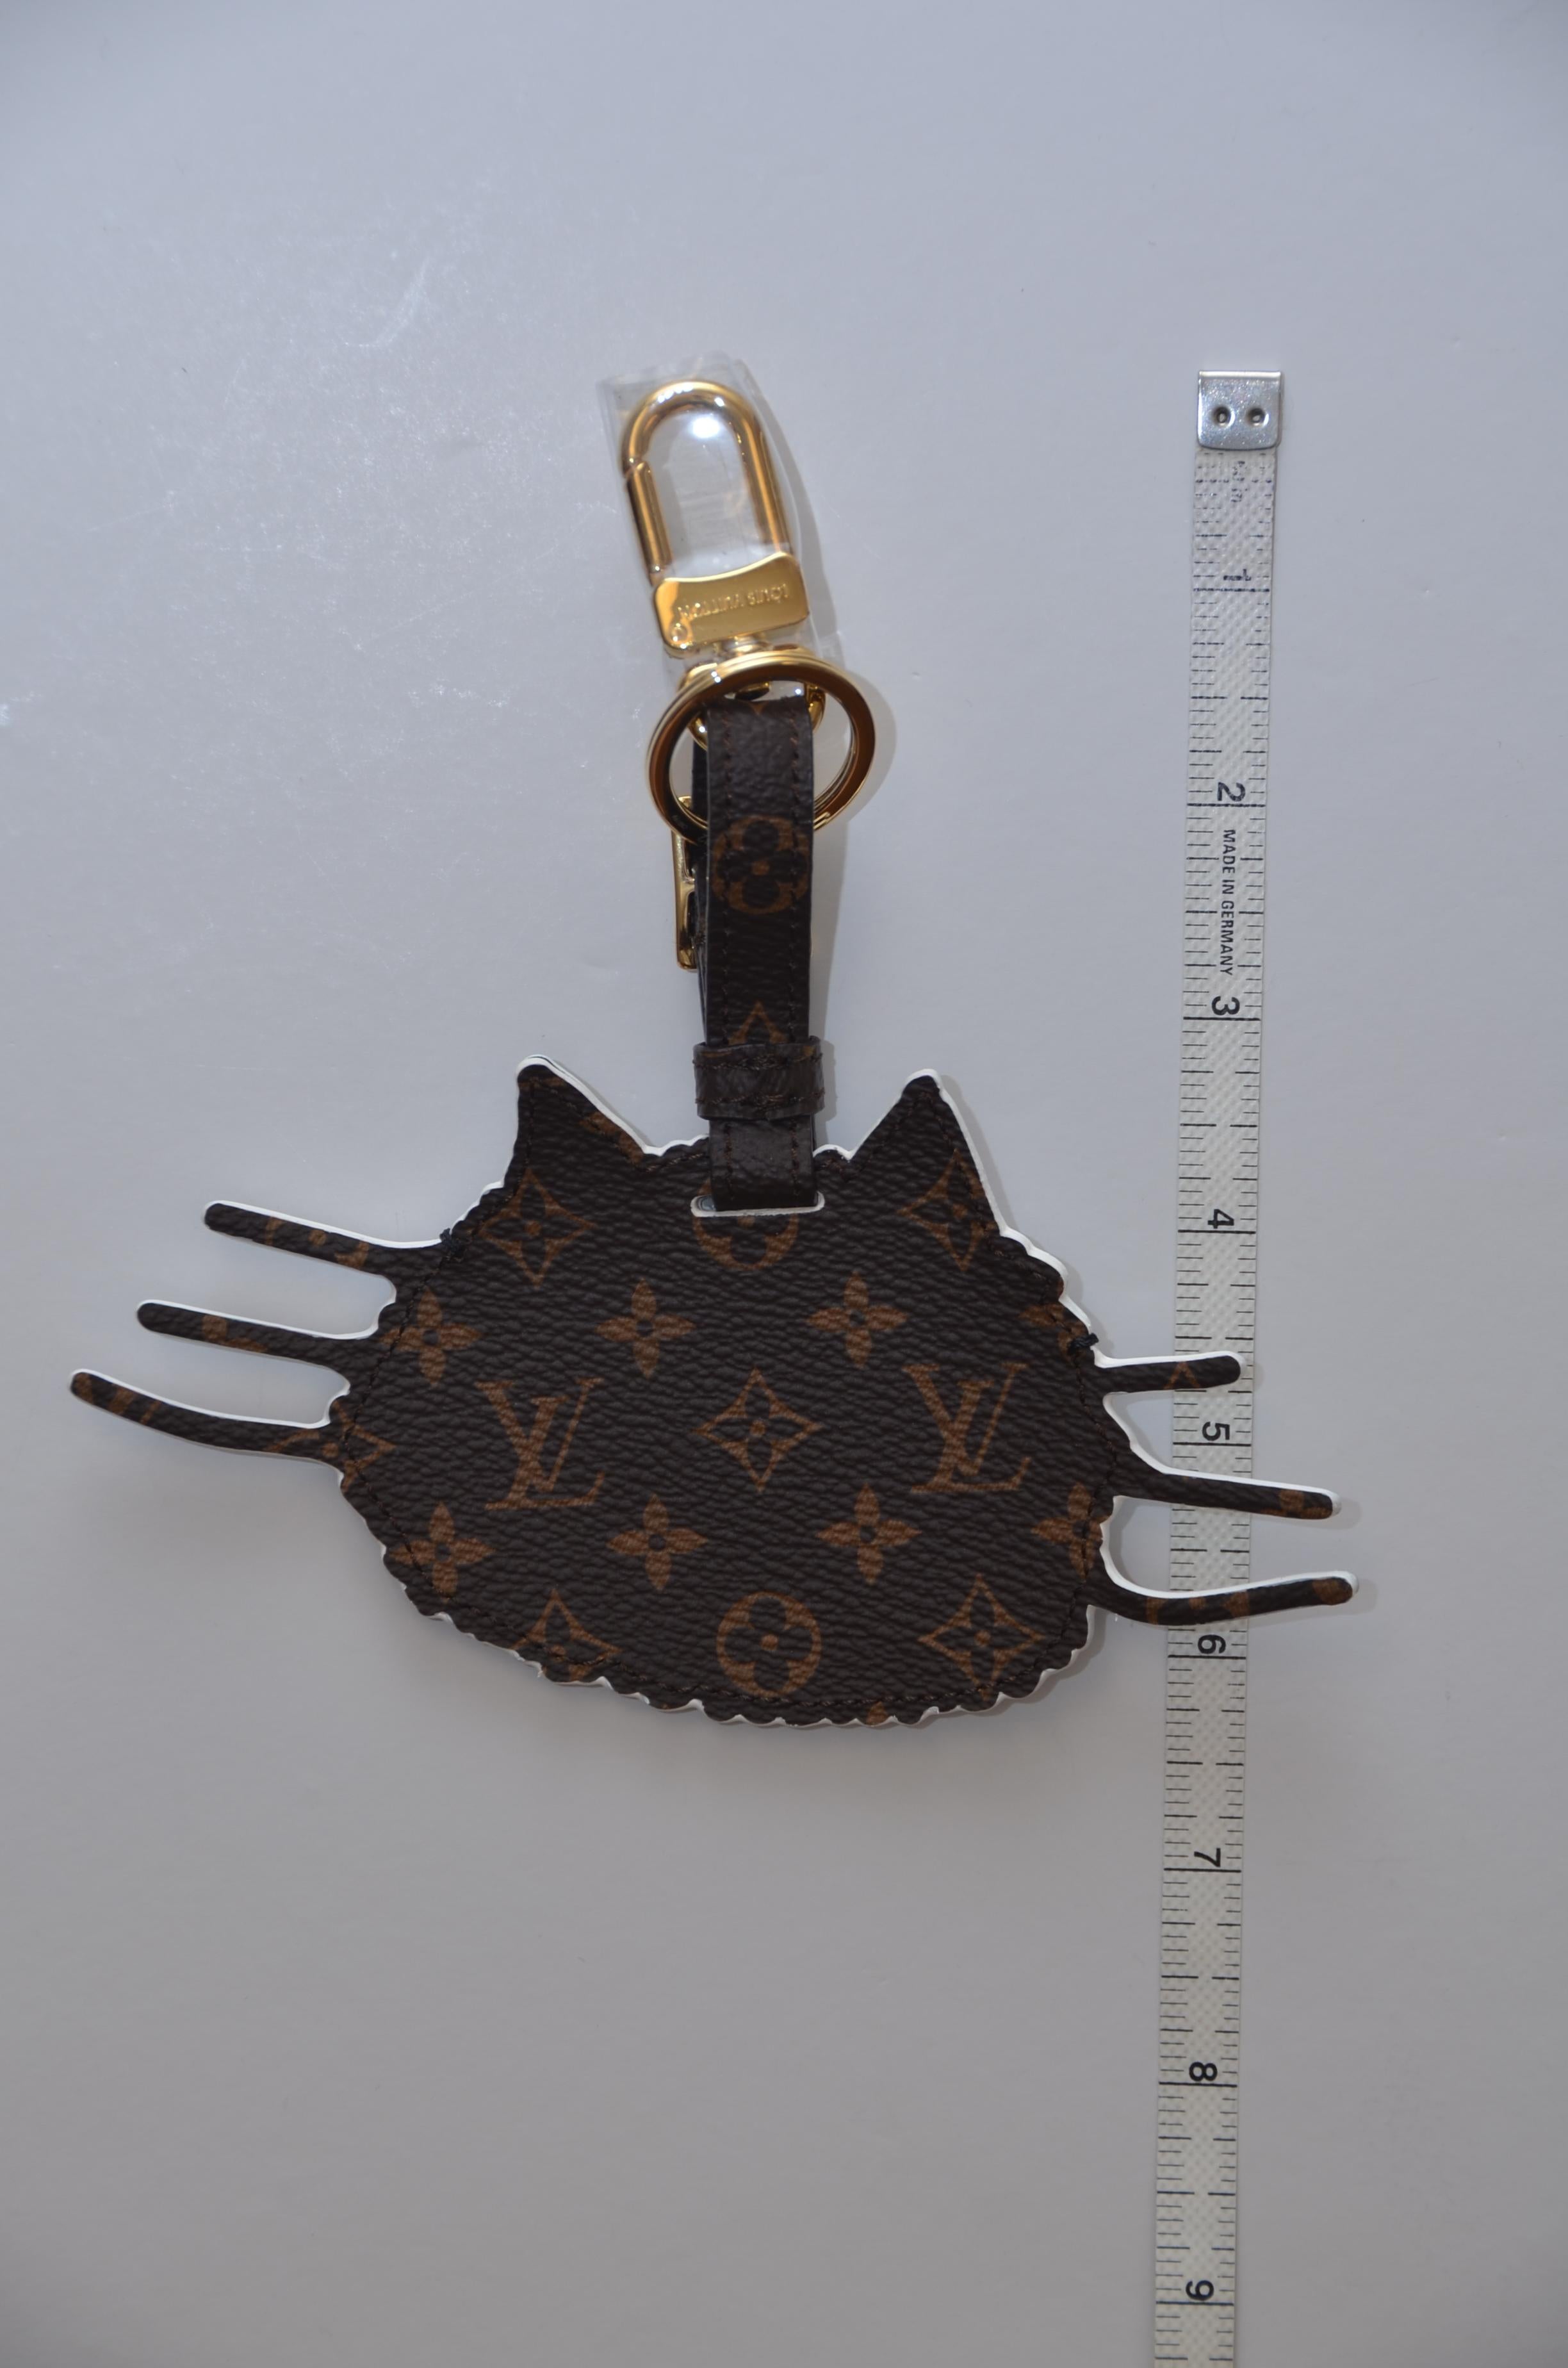 lv rodeo bag charm and key holder